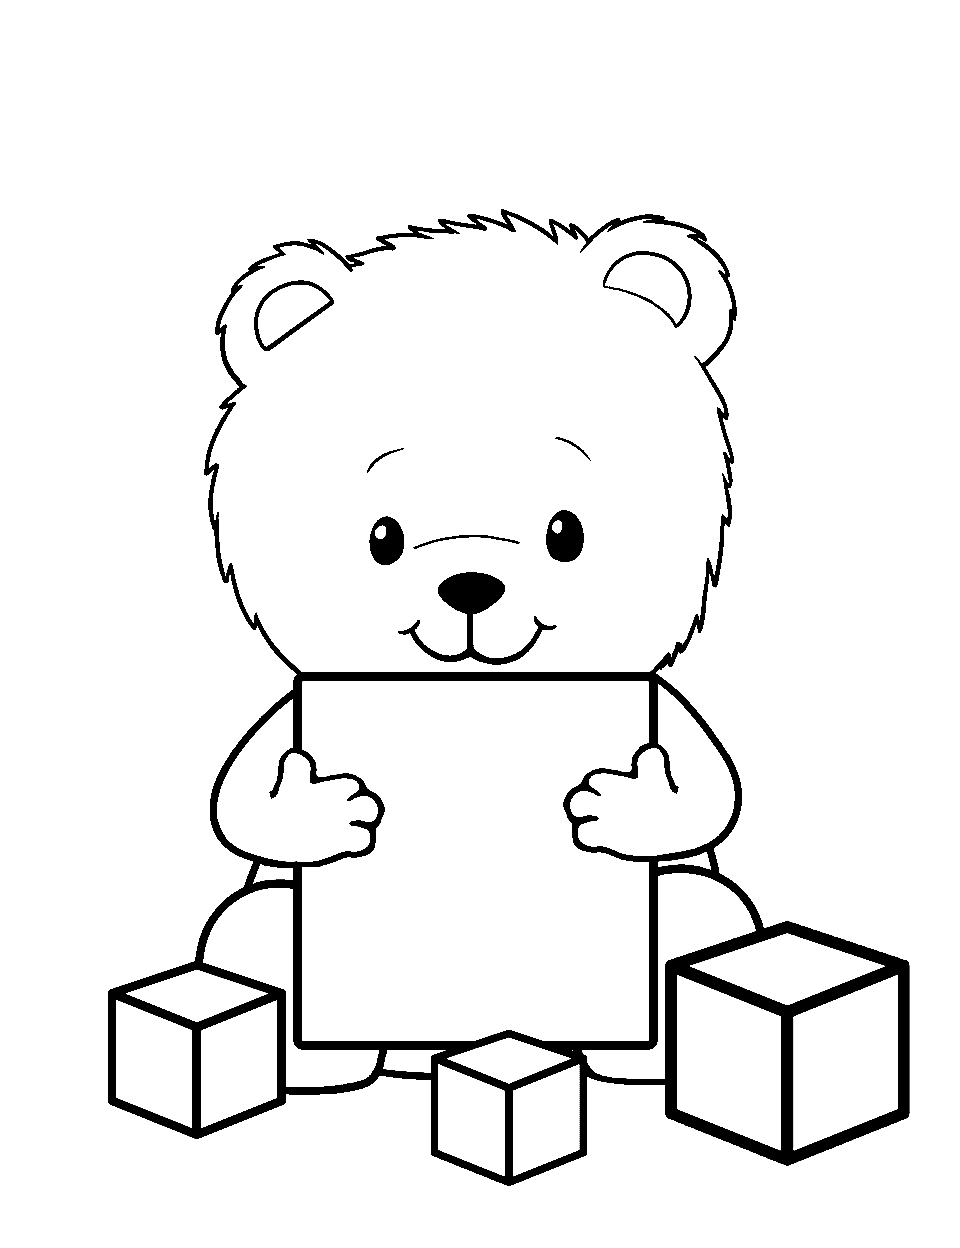 Toddler Bear's Playtime Coloring Page - A toddler-sized bear playing with block toys.